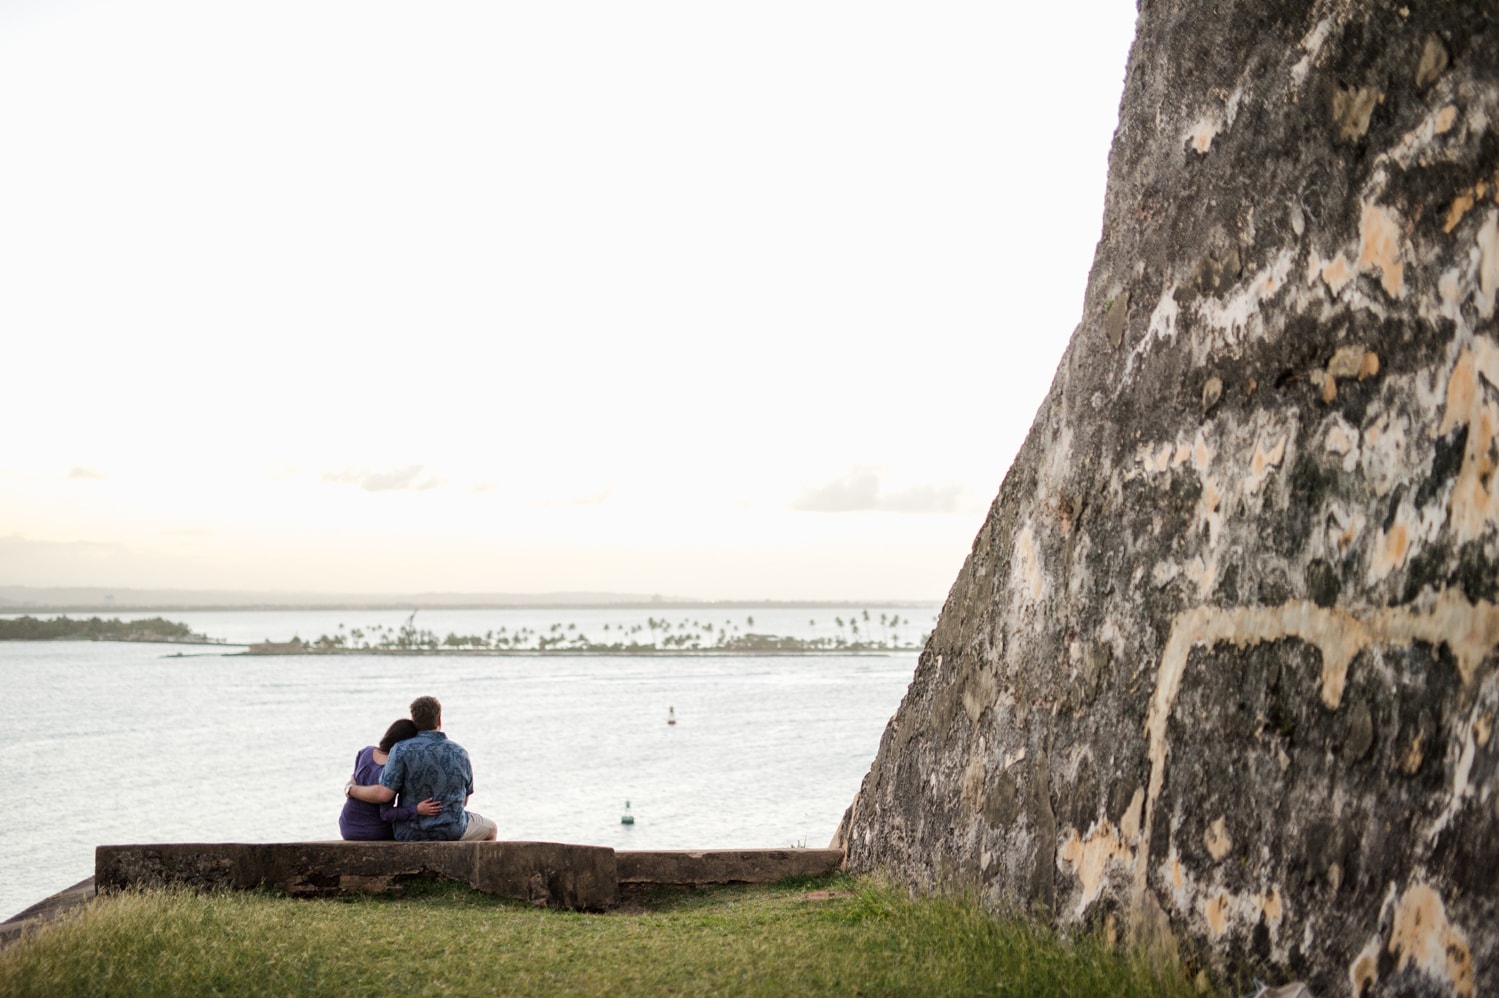 Engagement photos during Old San Juan vacations by Puerto Rico wedding photographer Camille Fontanez